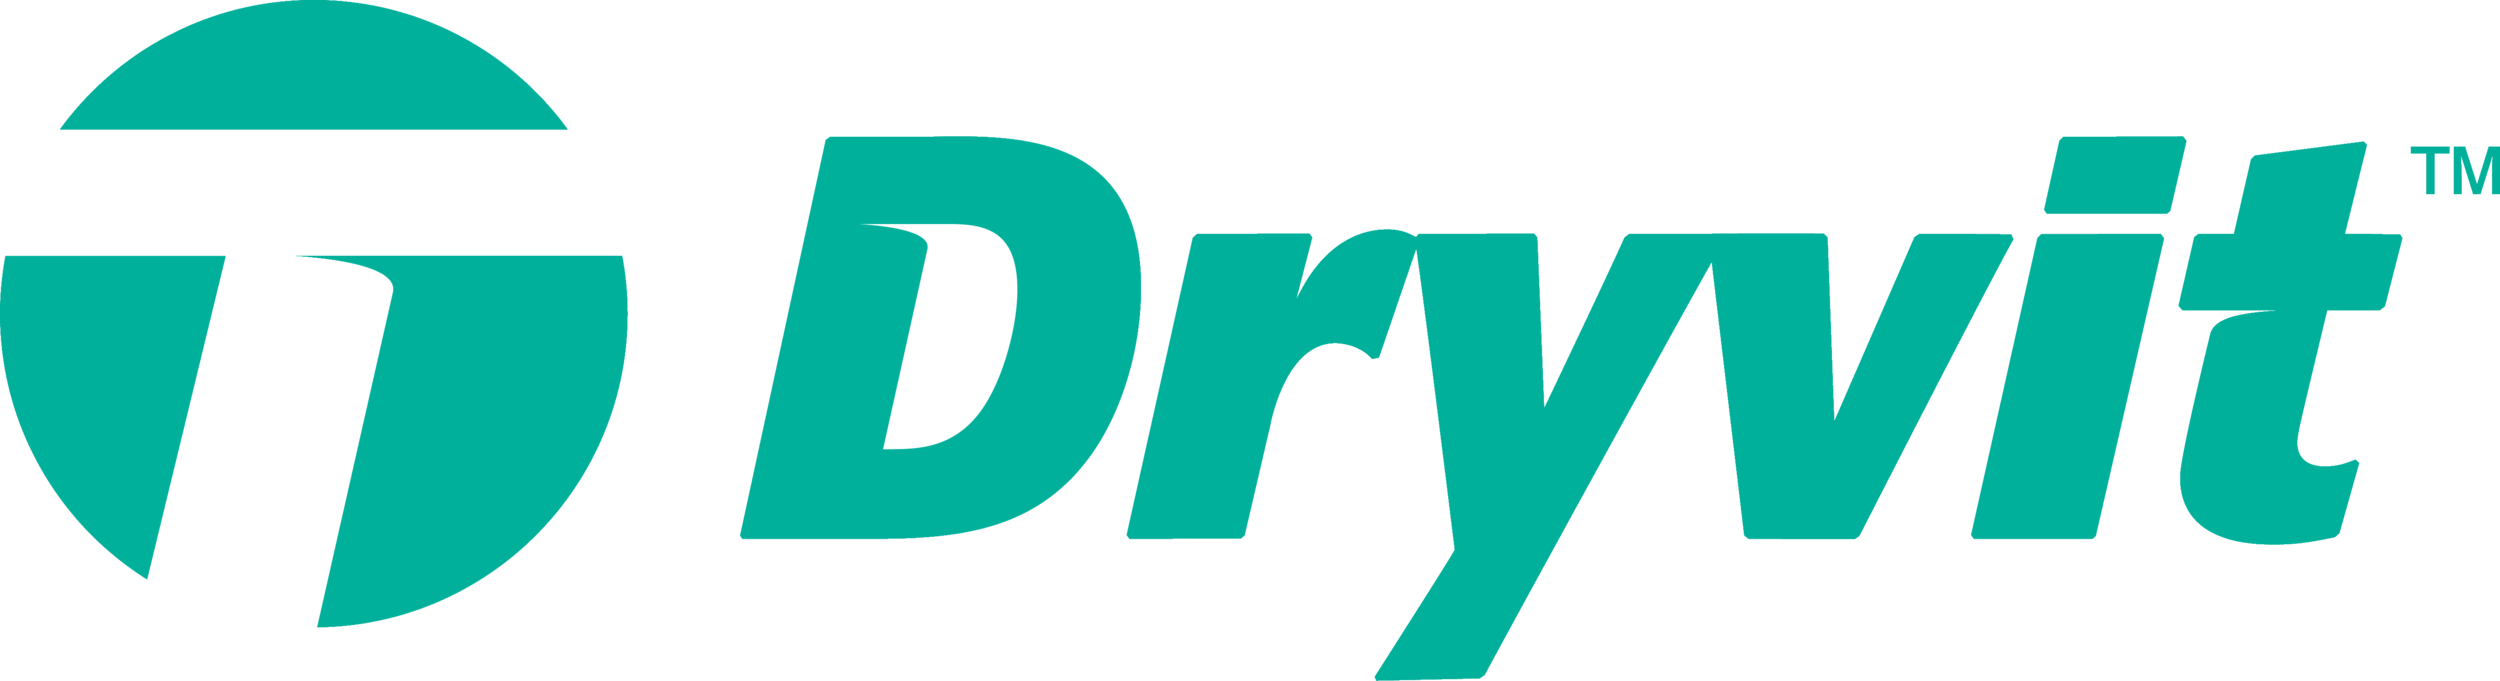 dryvit-logo_large_color.png